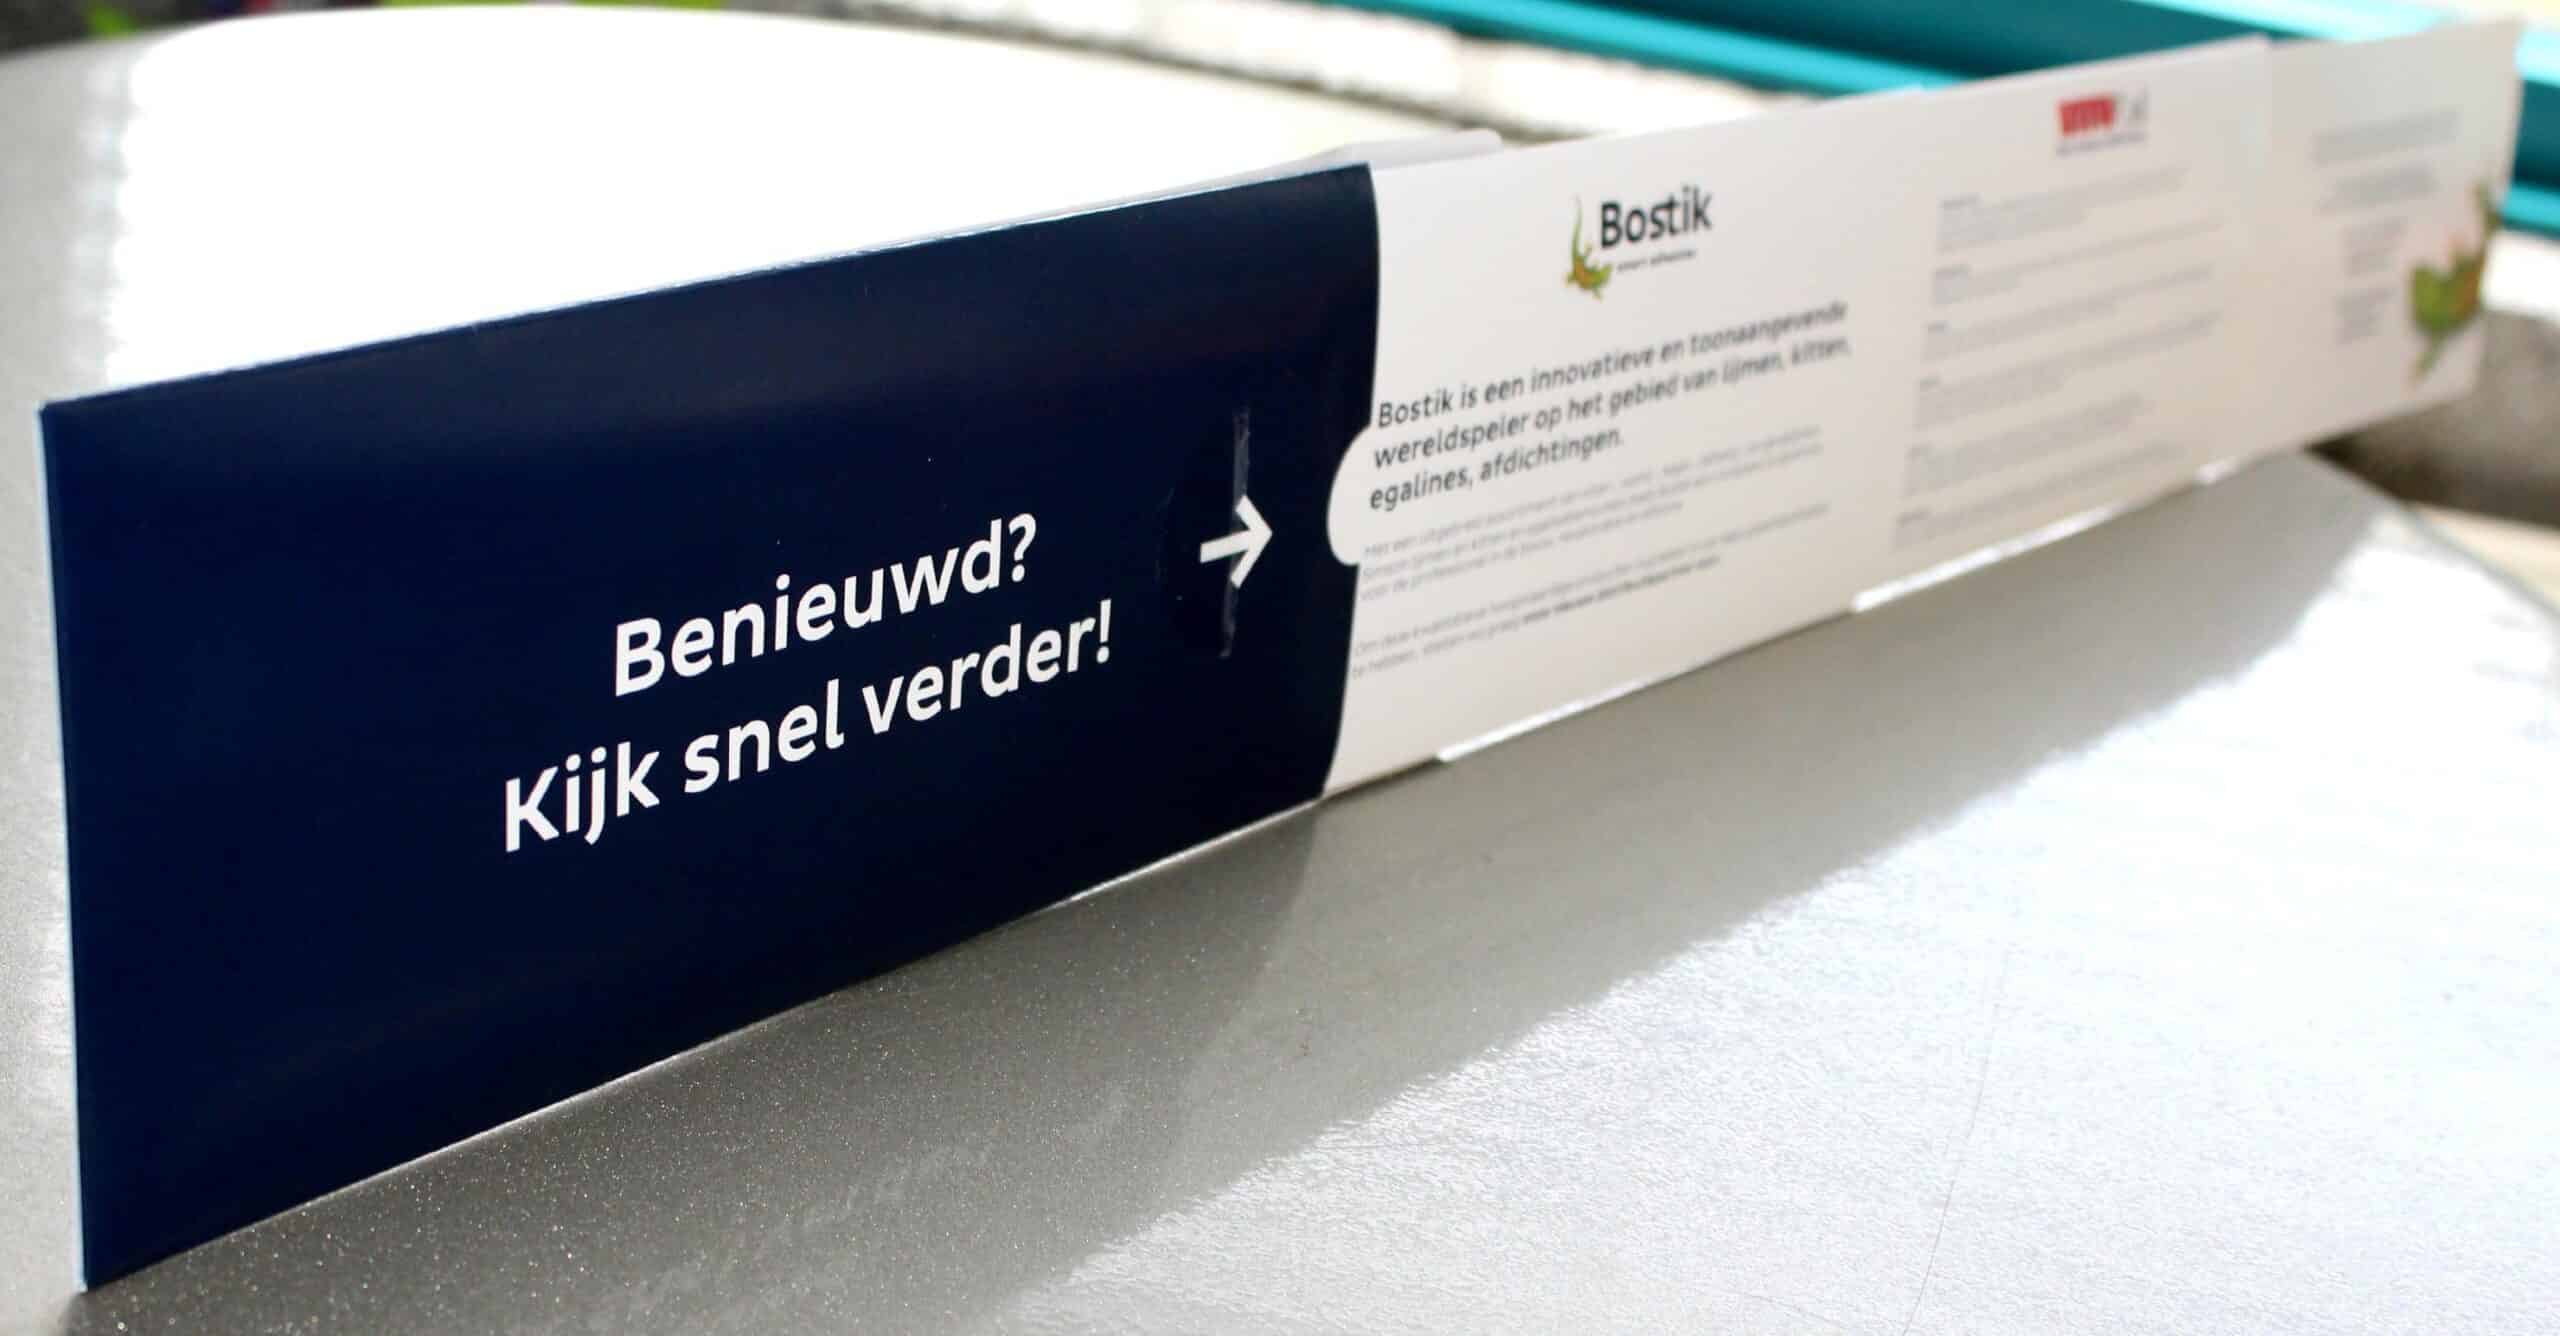 Telecard self-mailer used as informative direct mail by Bostik